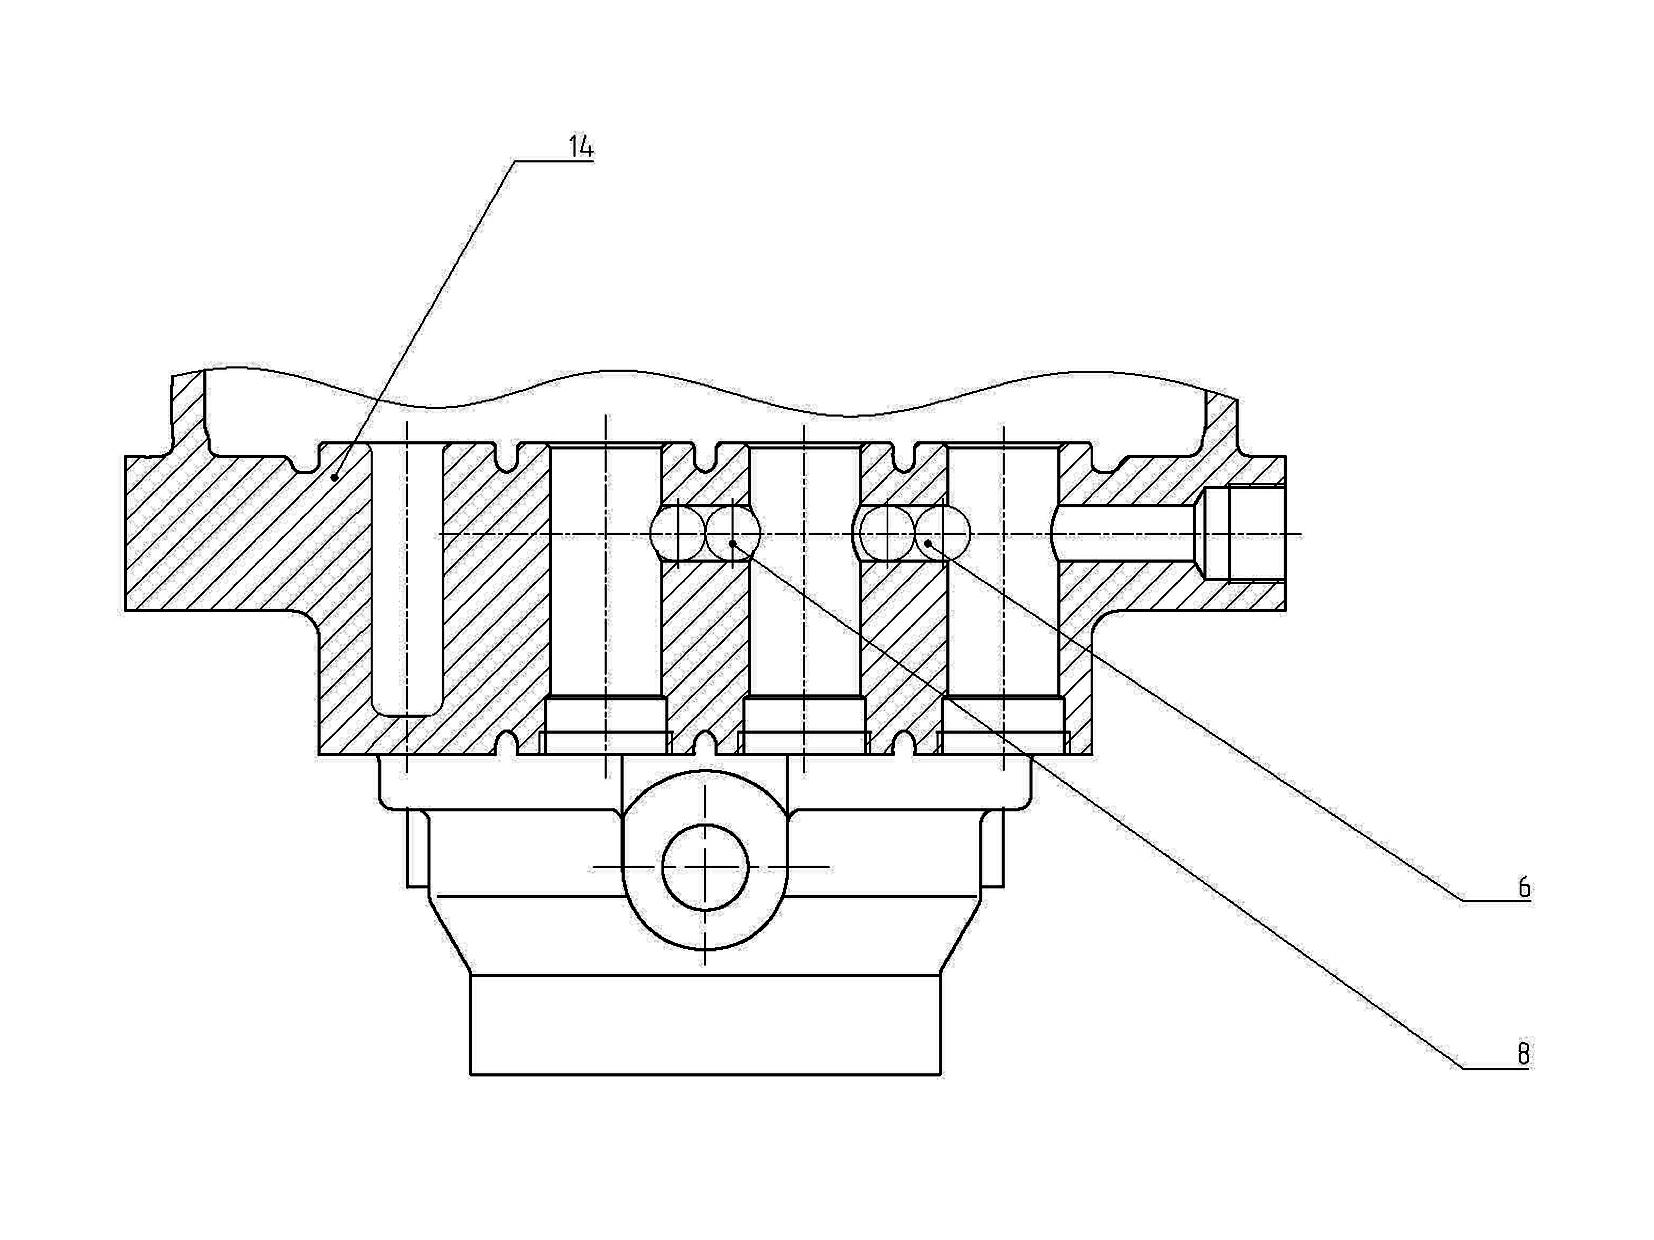 Self-locking and interlocking mechanism for cylindrical shell speed changer